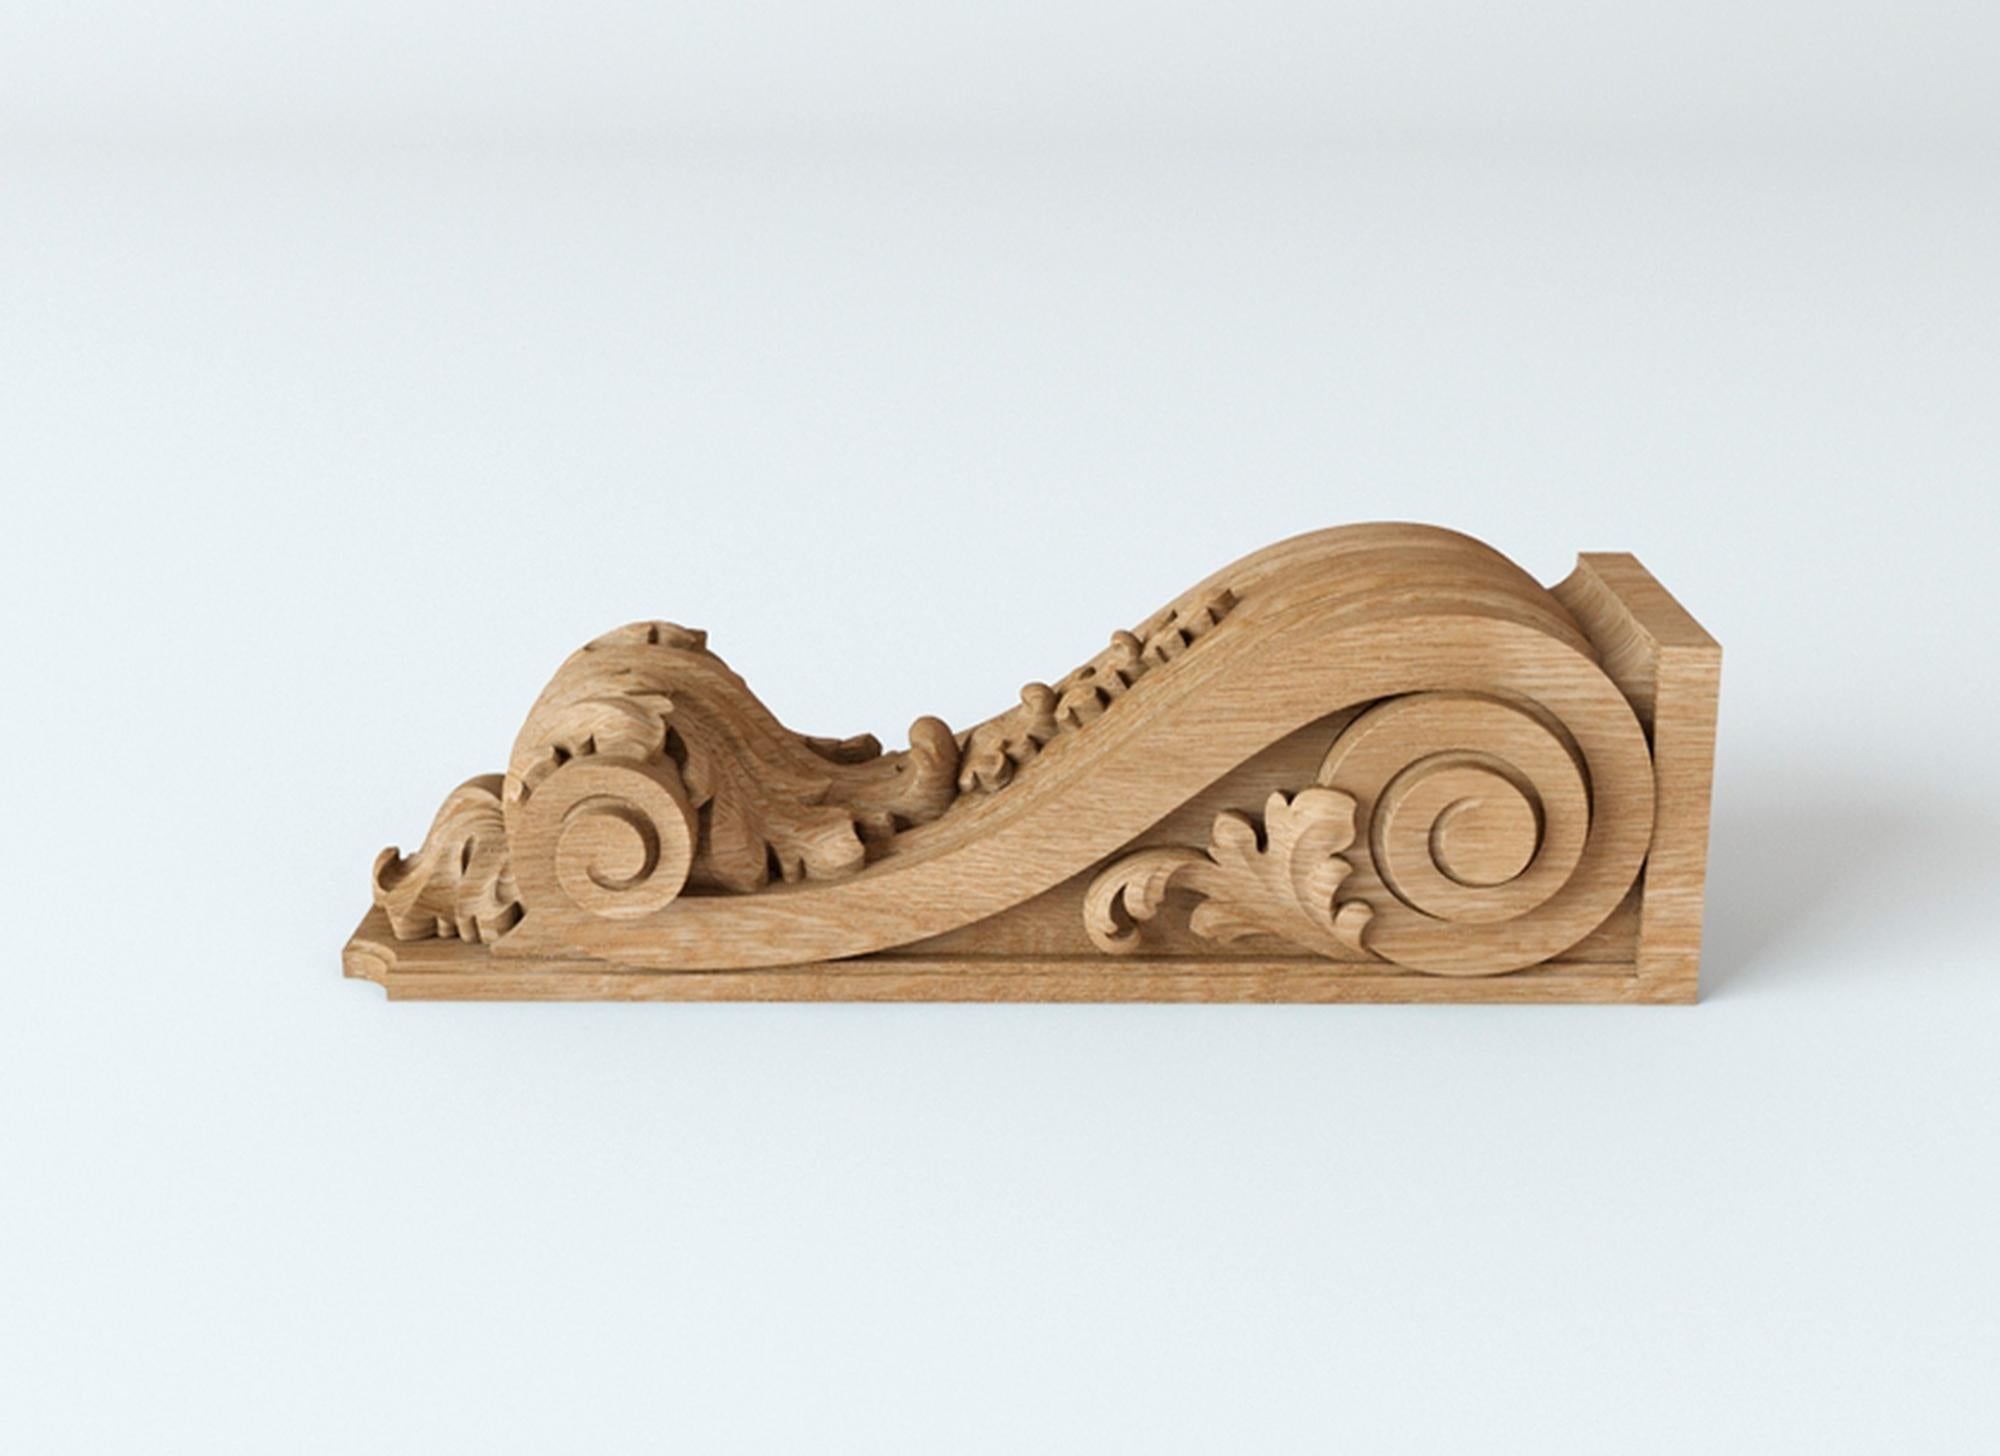 High-quality unfinished carved wooden corbel. Unpainted.

>> SKU: KR-002.01

>> Dimensions (A x B x C x d x e):

1) 7.52